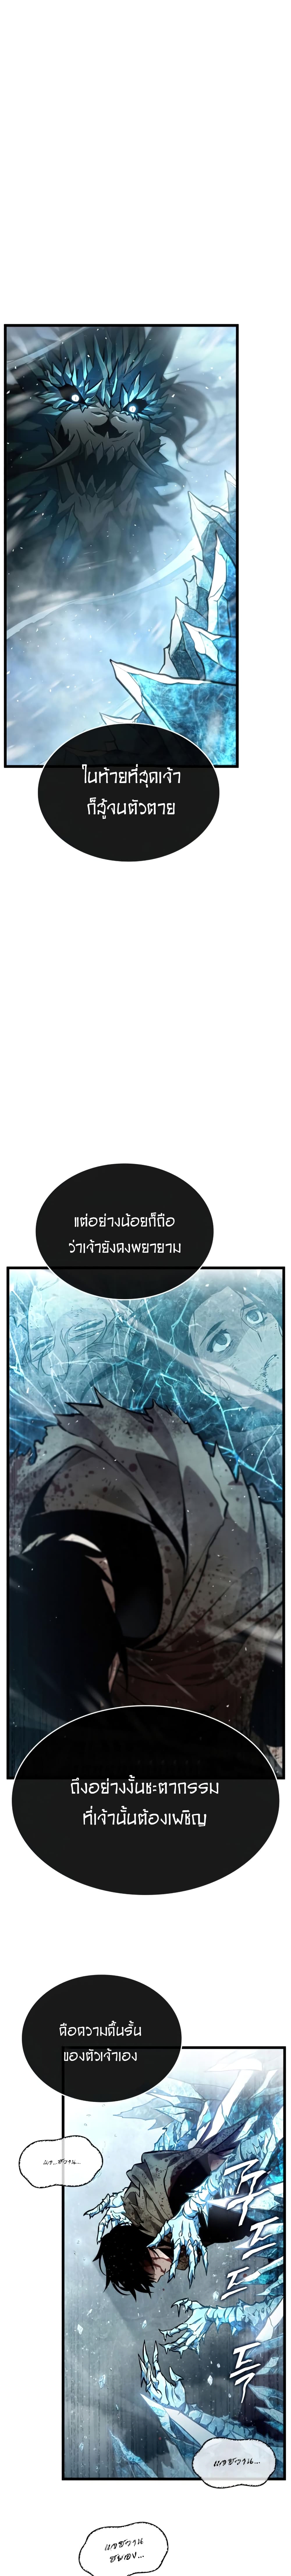 The World After The End 4 แปลไทย